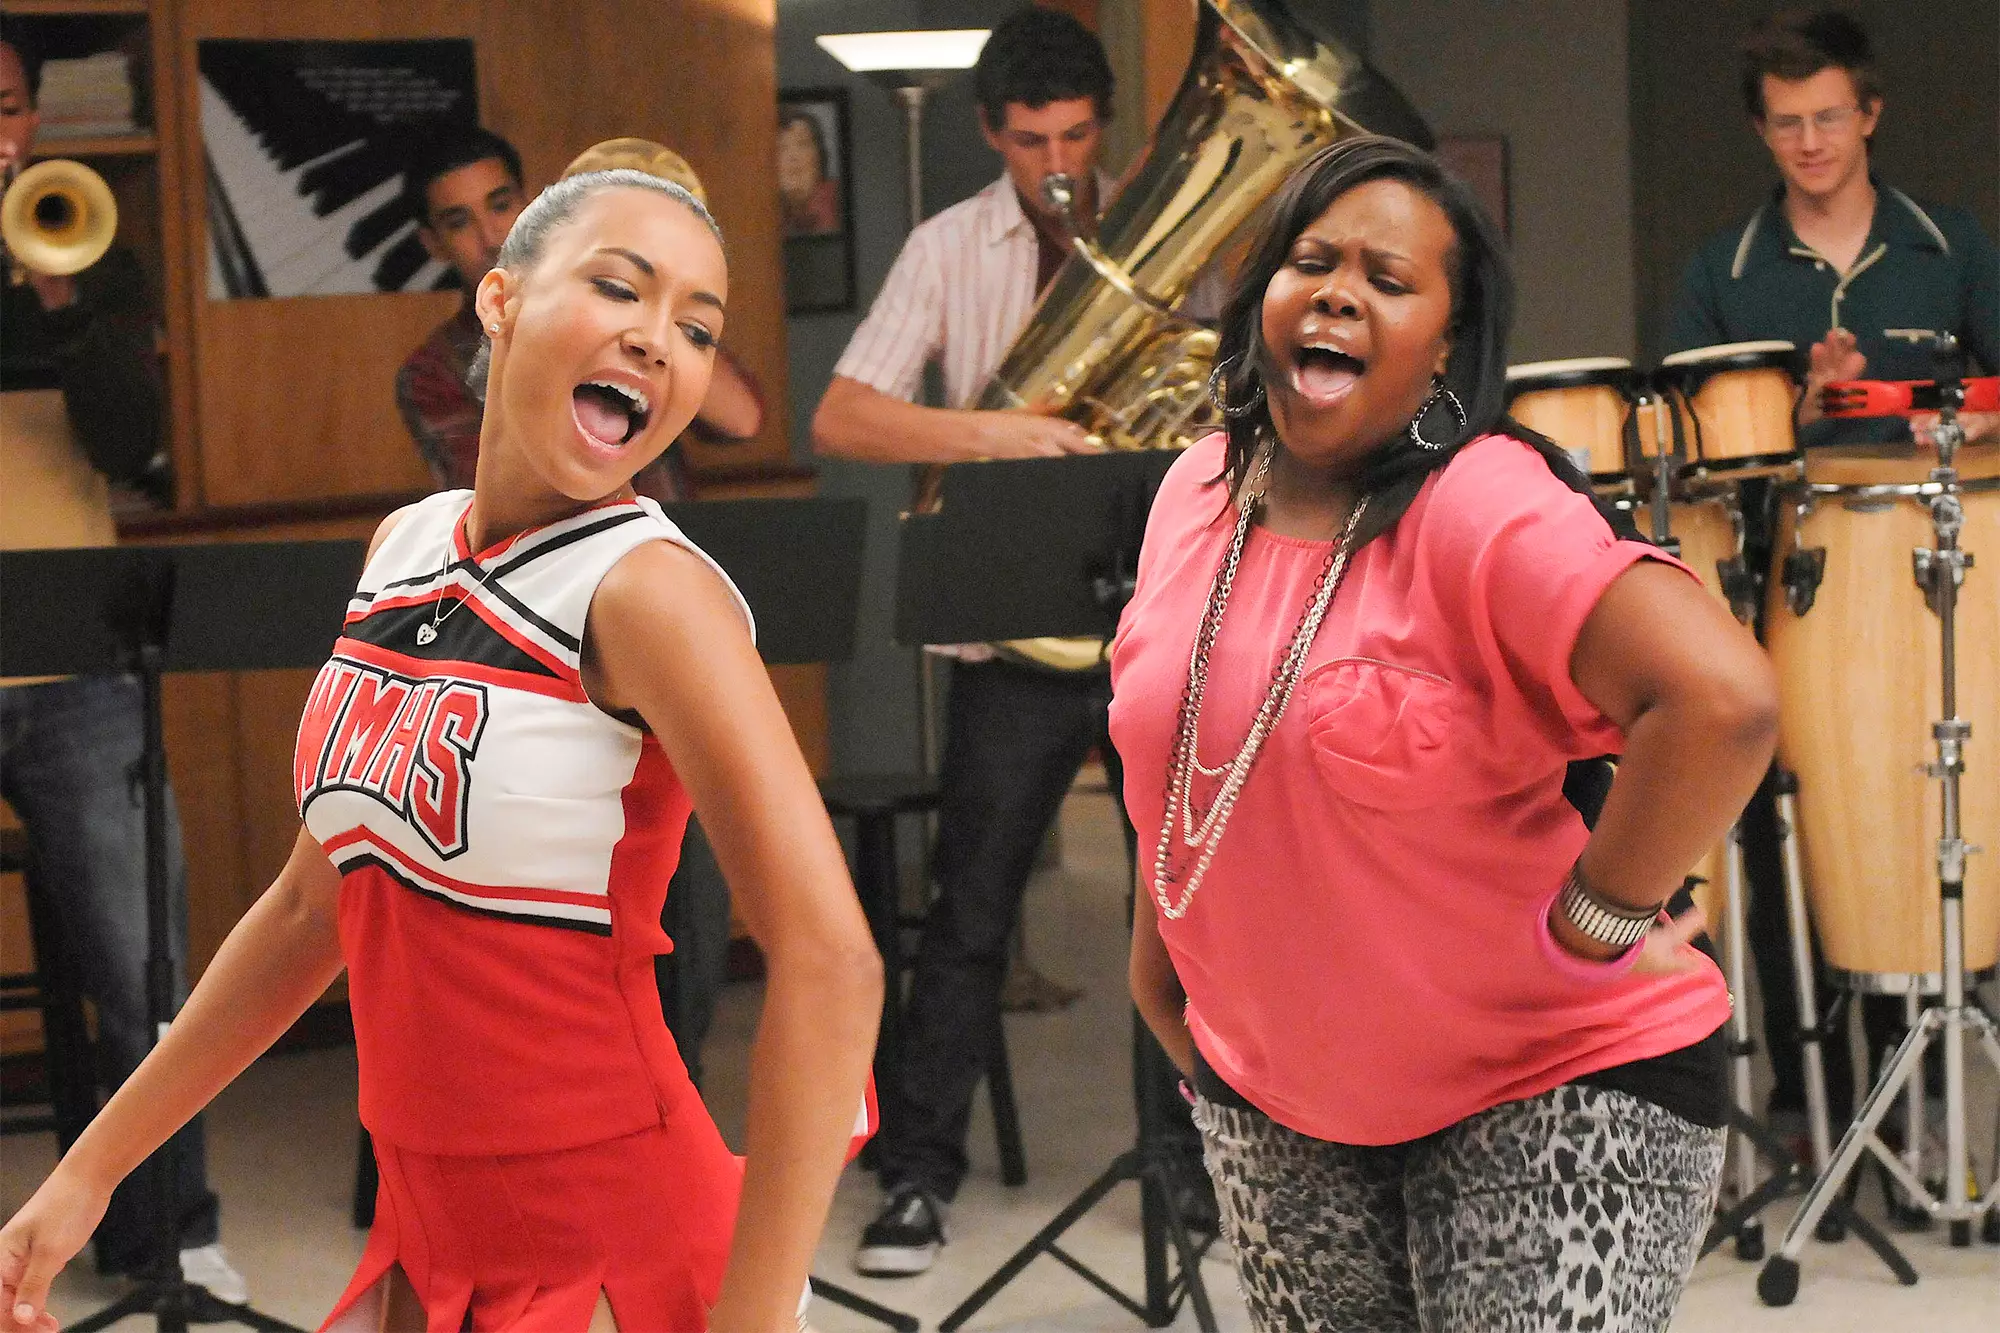 The 'Glee' actress will appear posthumously in the American baking reality series 'Sugar Rush' (